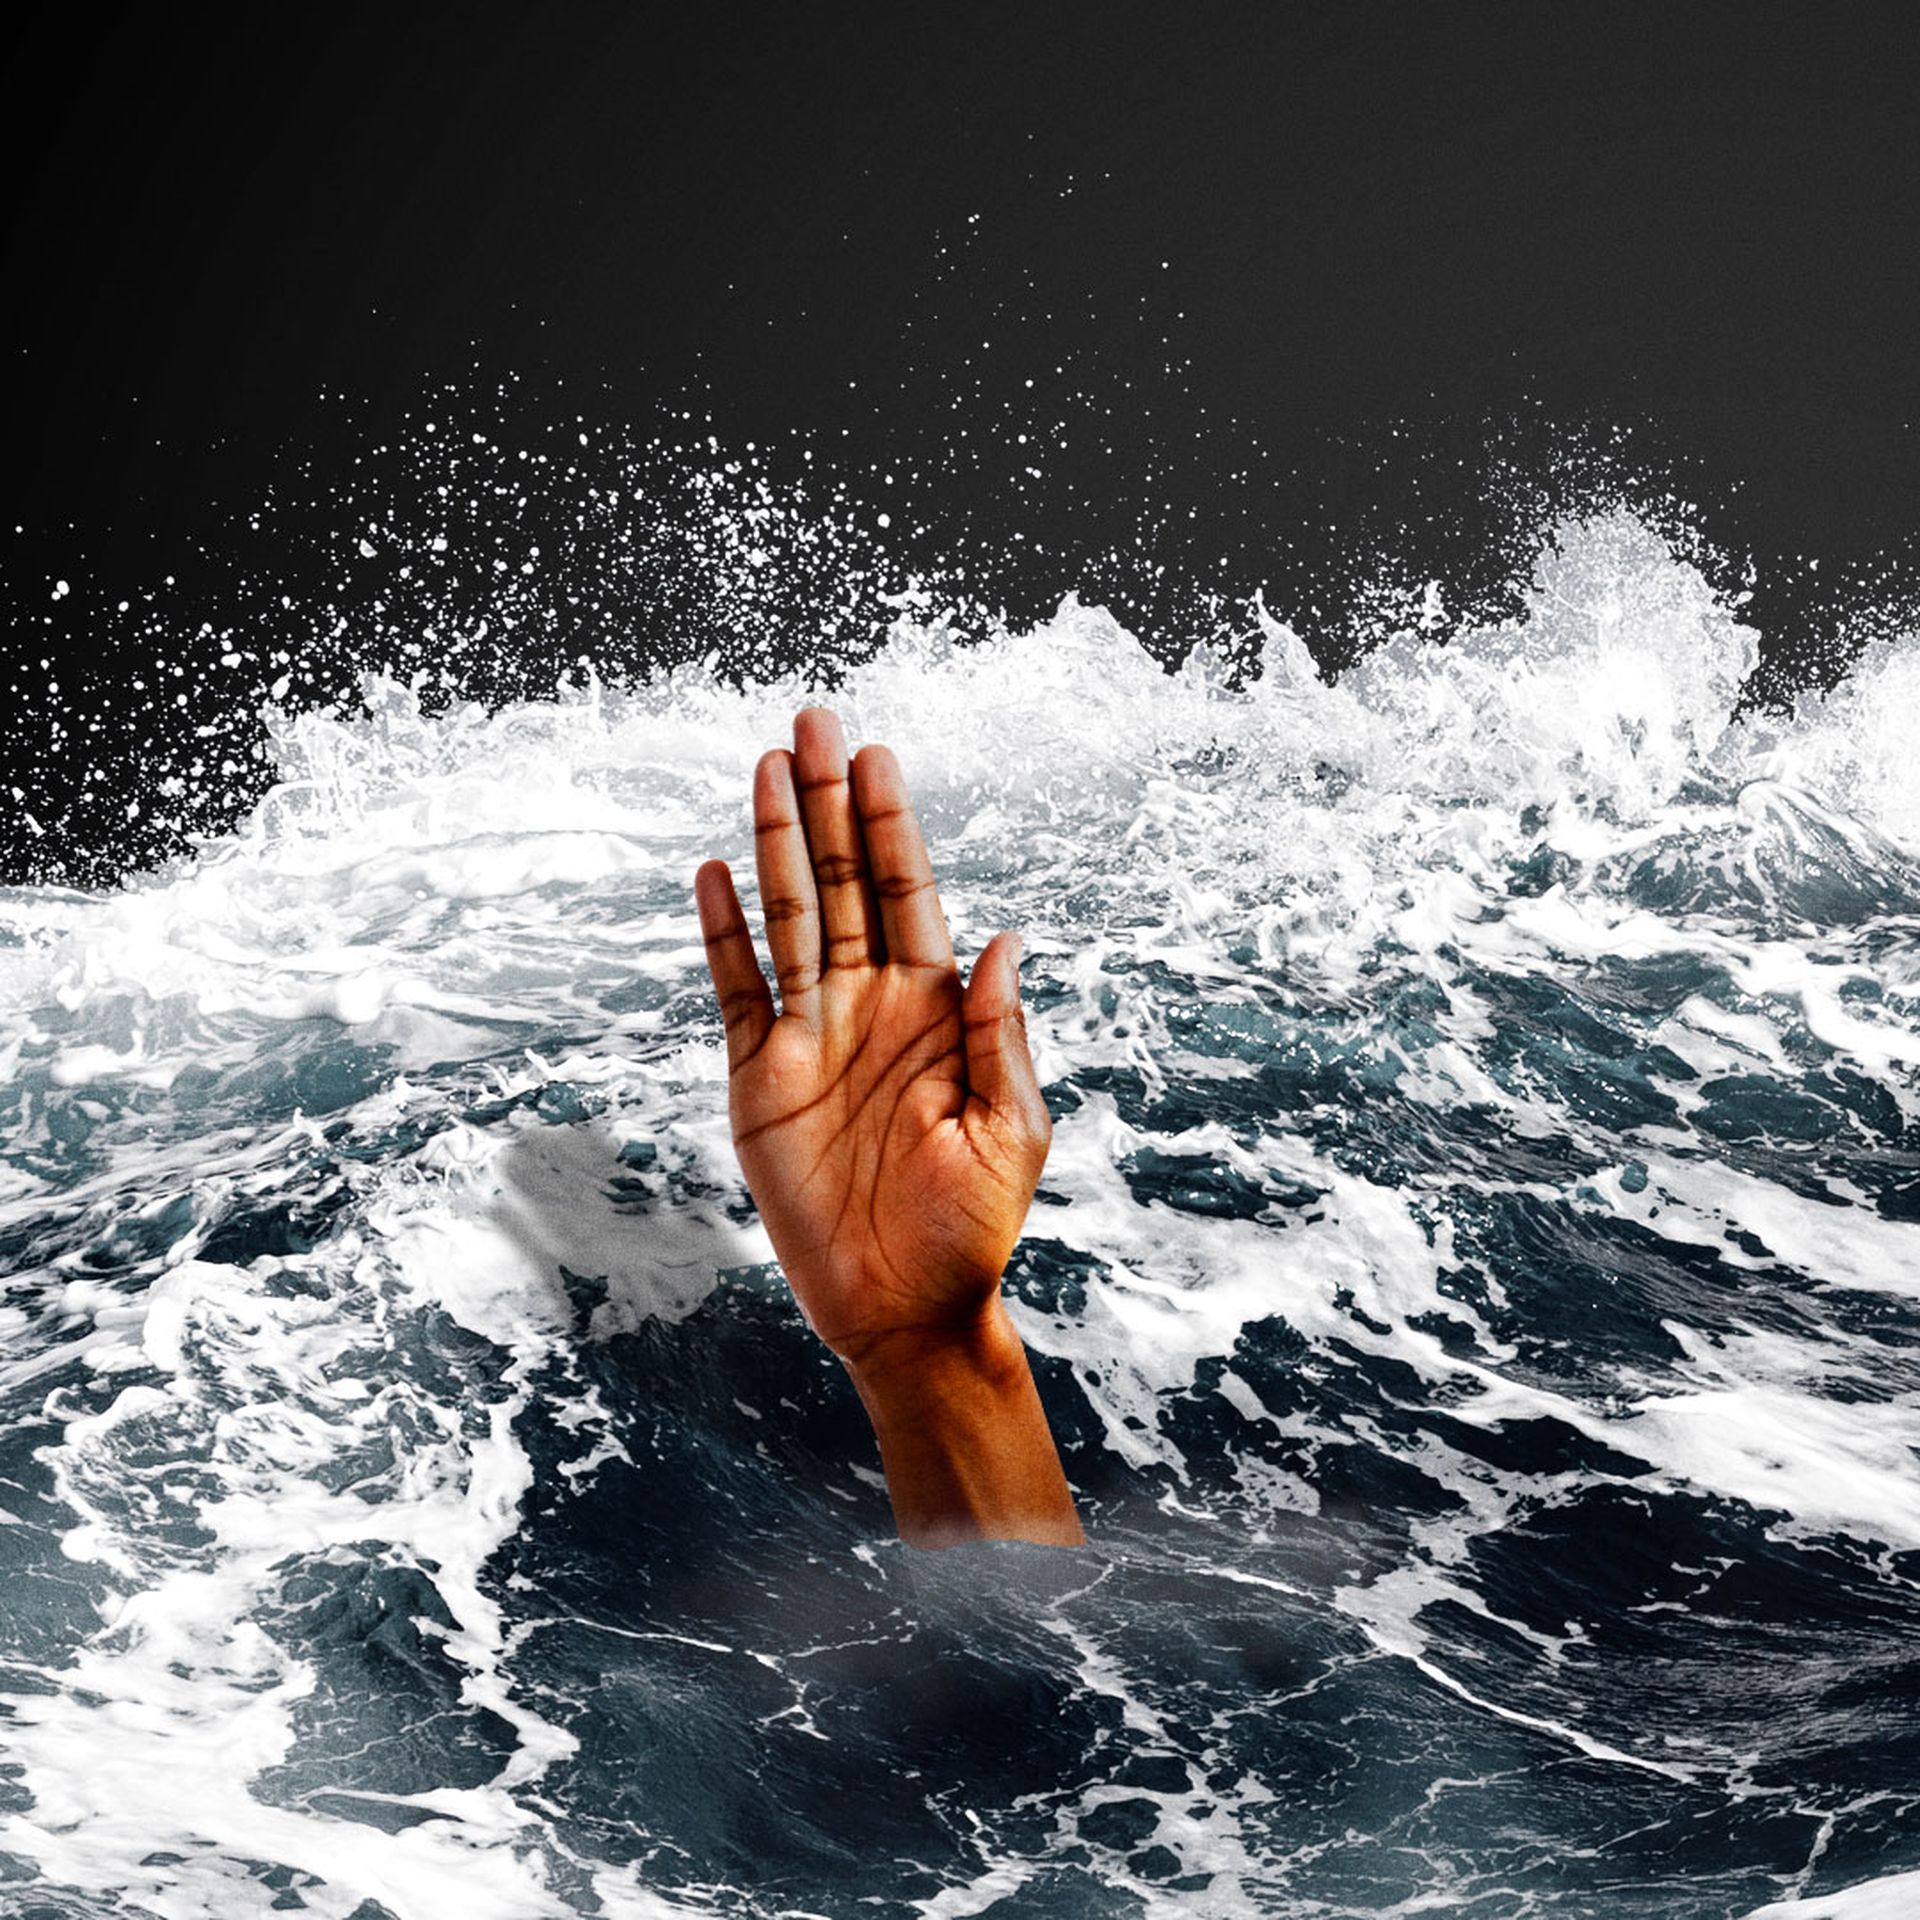 Illustration of black hand reaching out of rough water